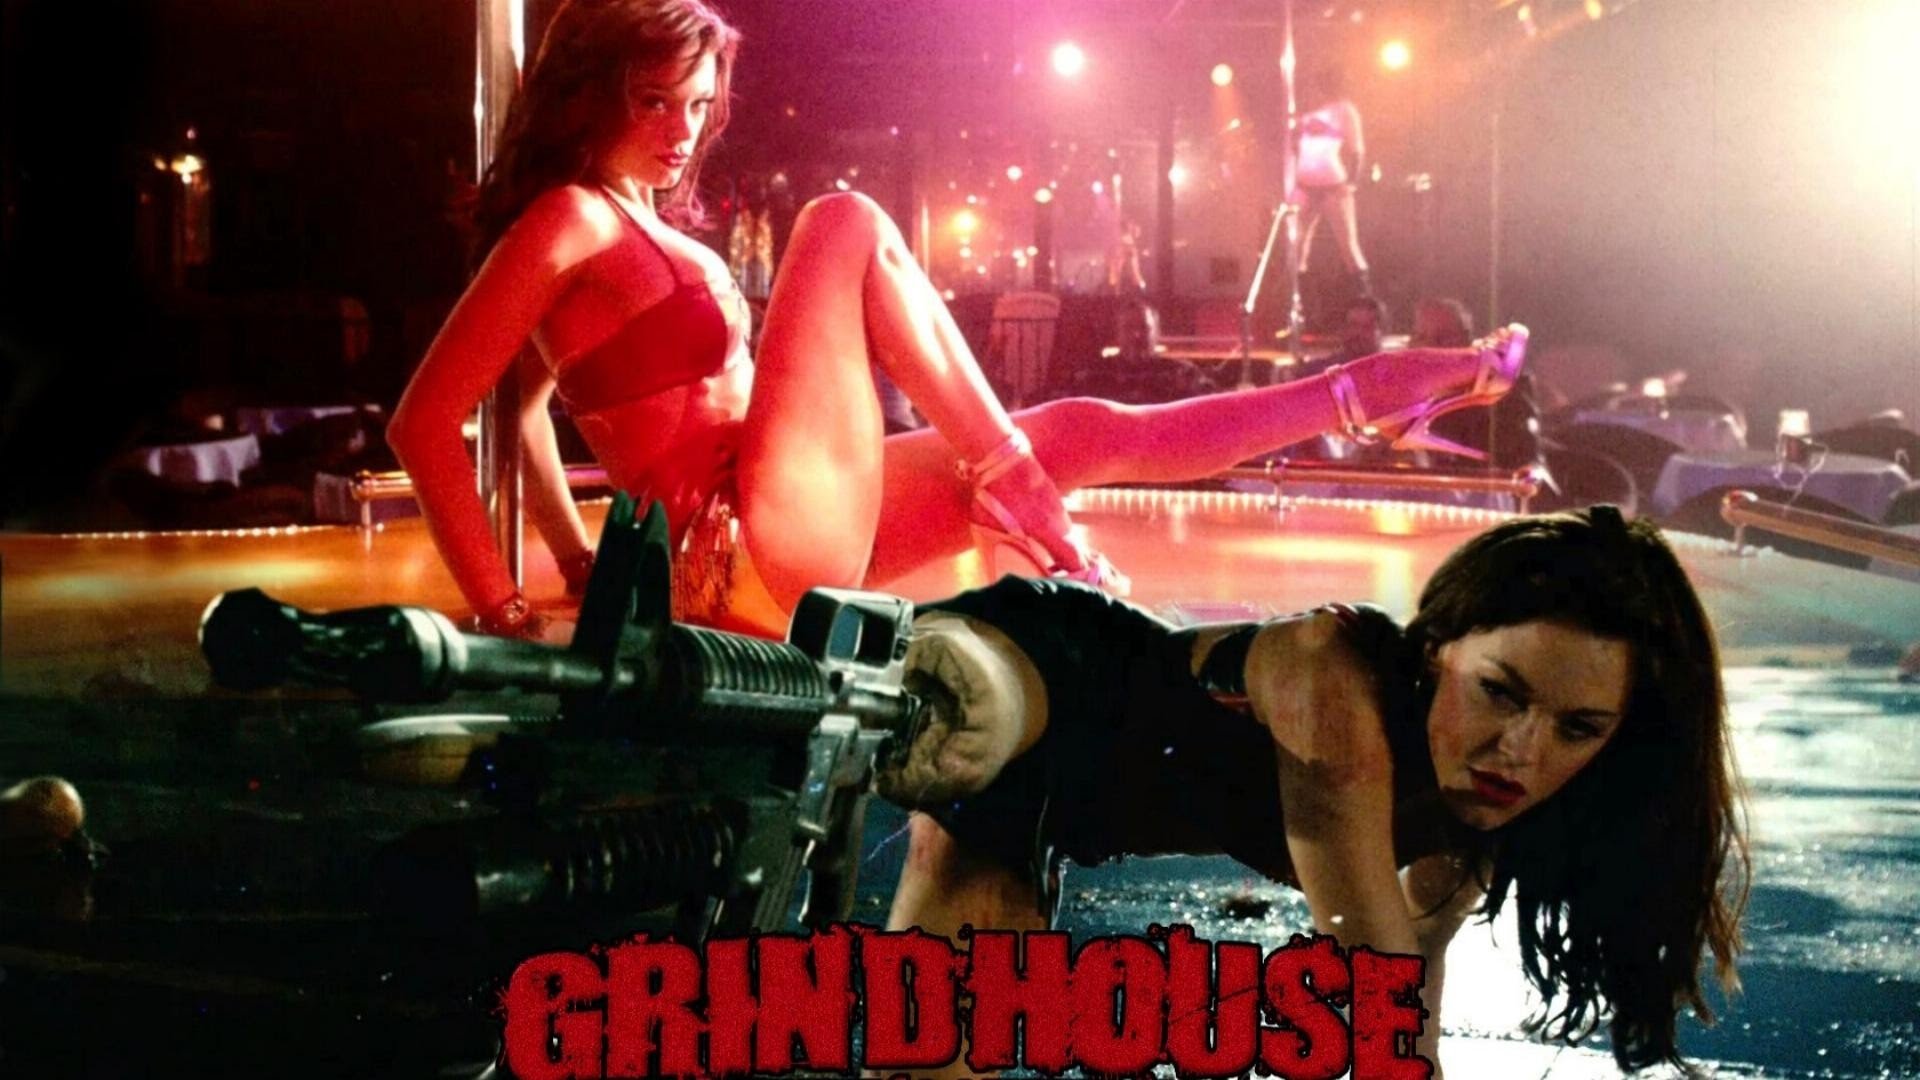 Nice Images Collection: Grindhouse Presents Desktop Wallpapers